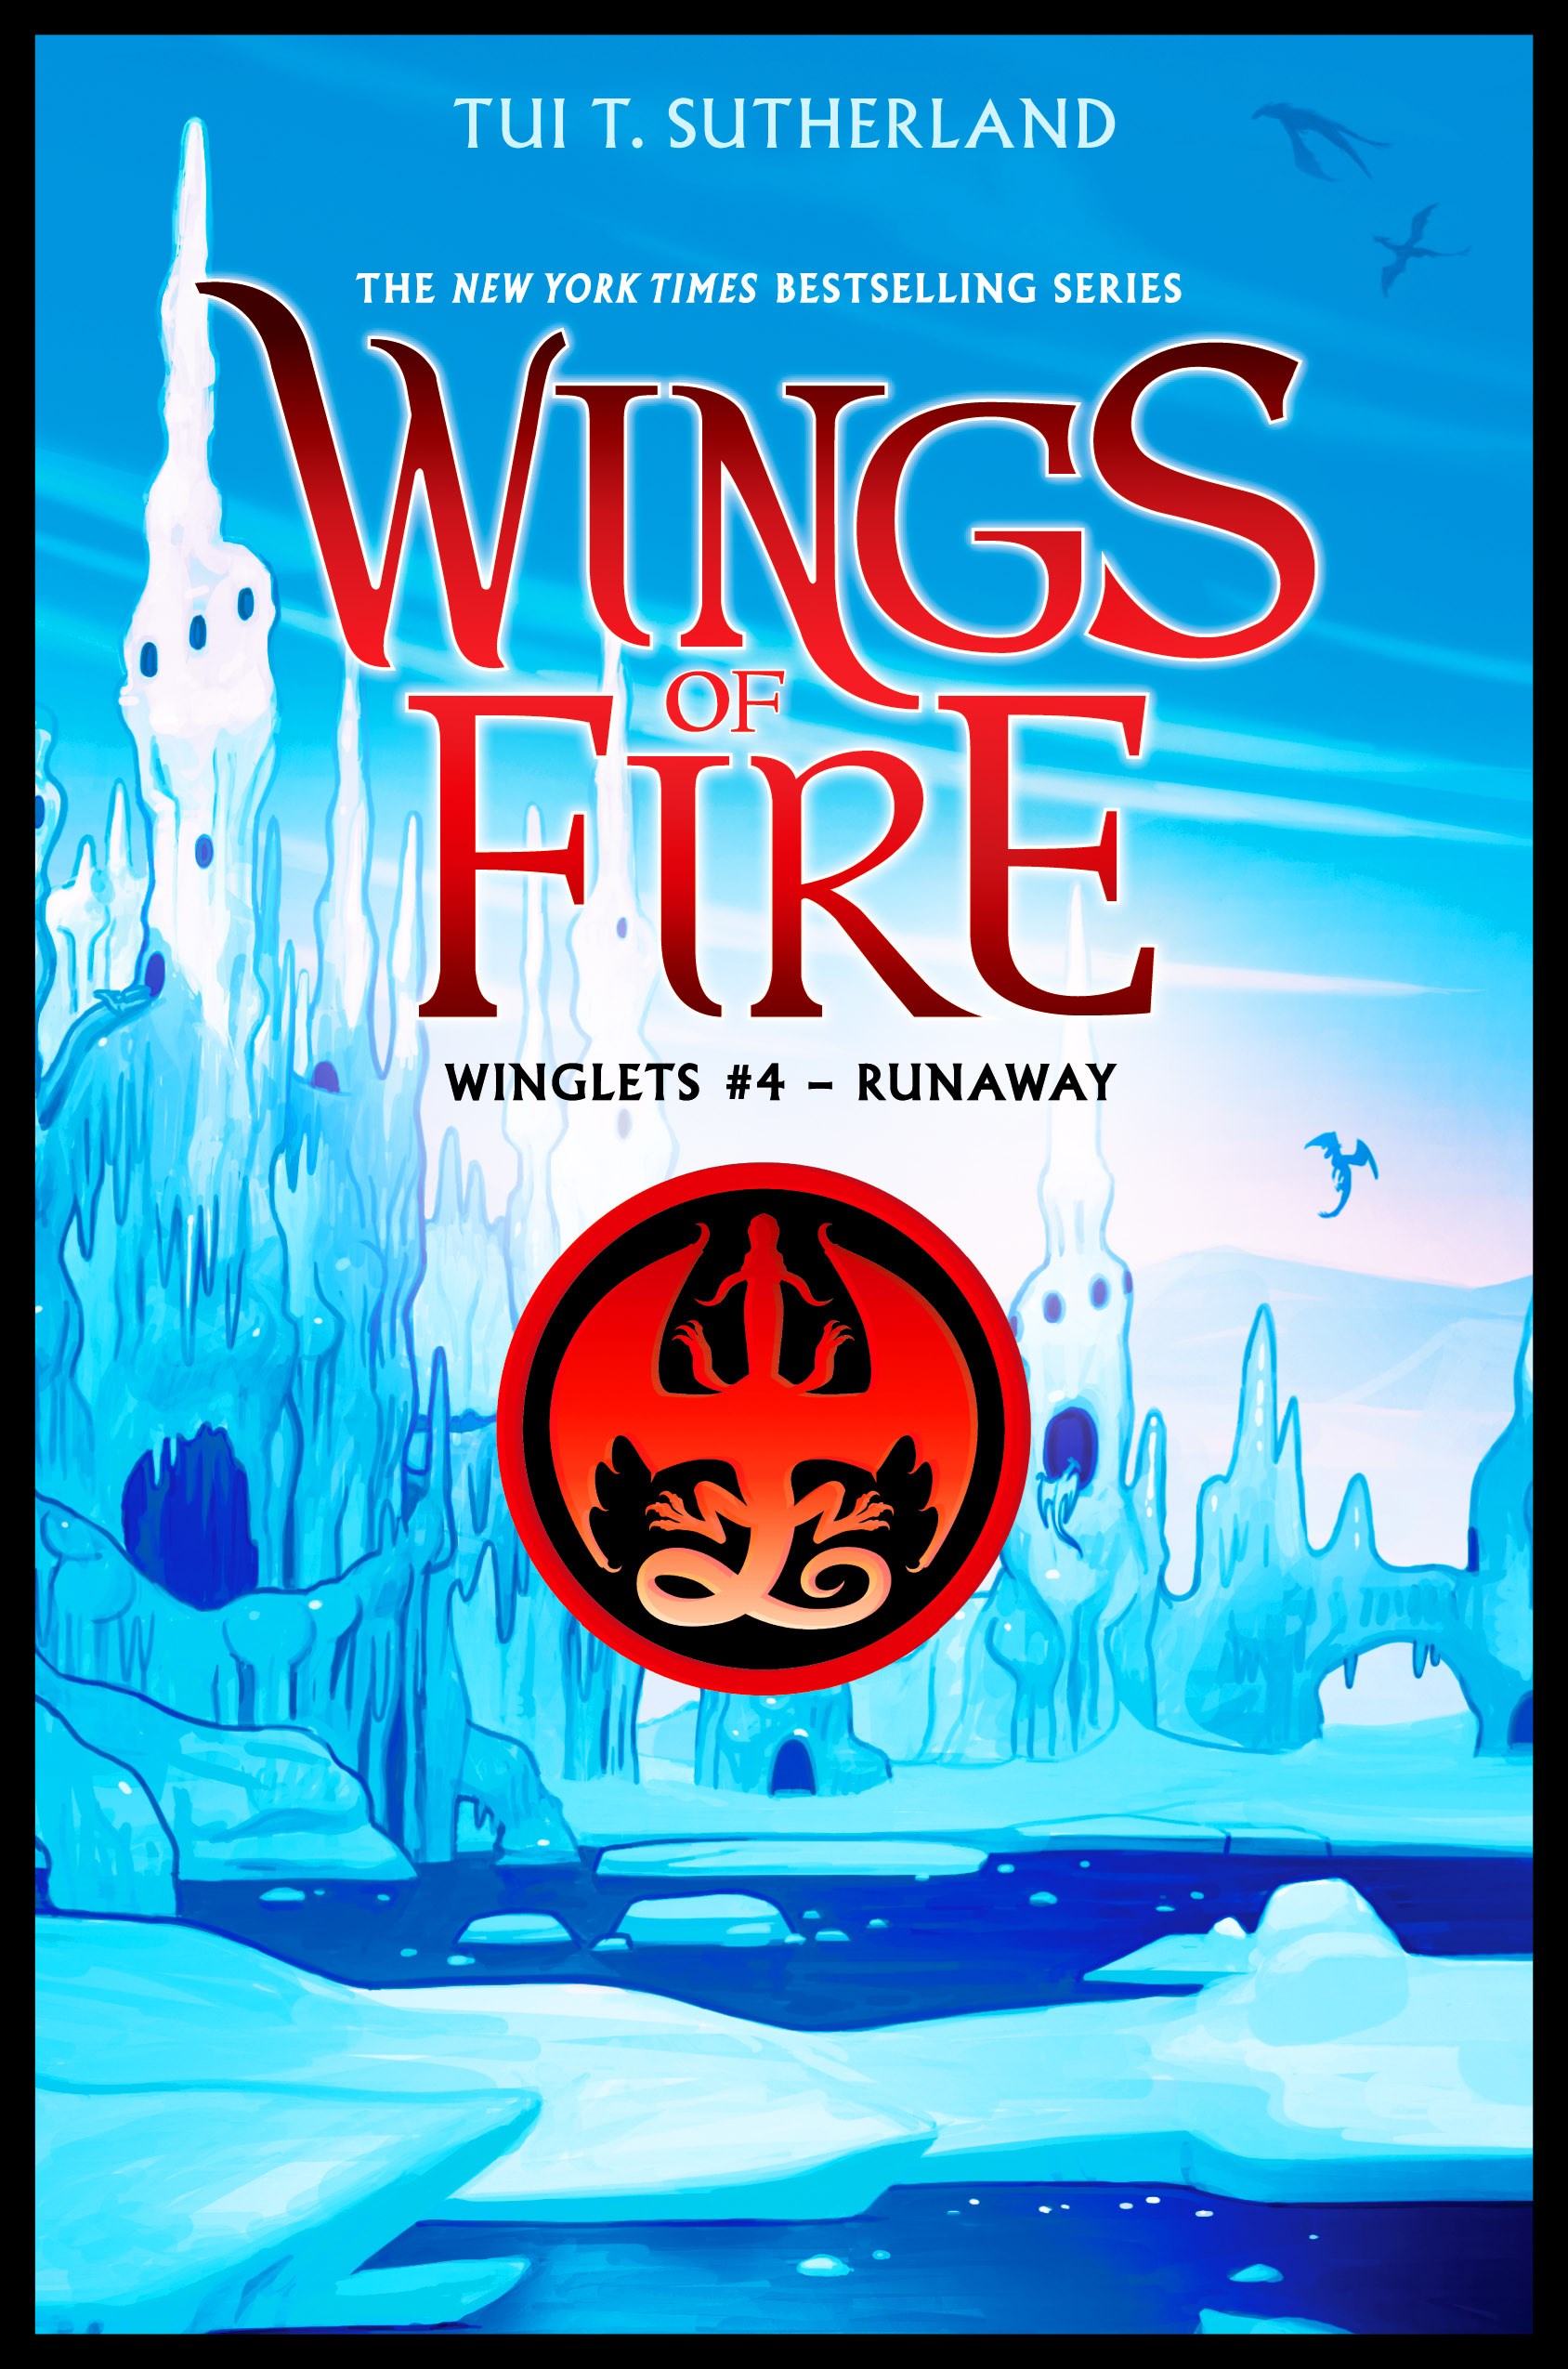 when is book 11 of wings of fire released